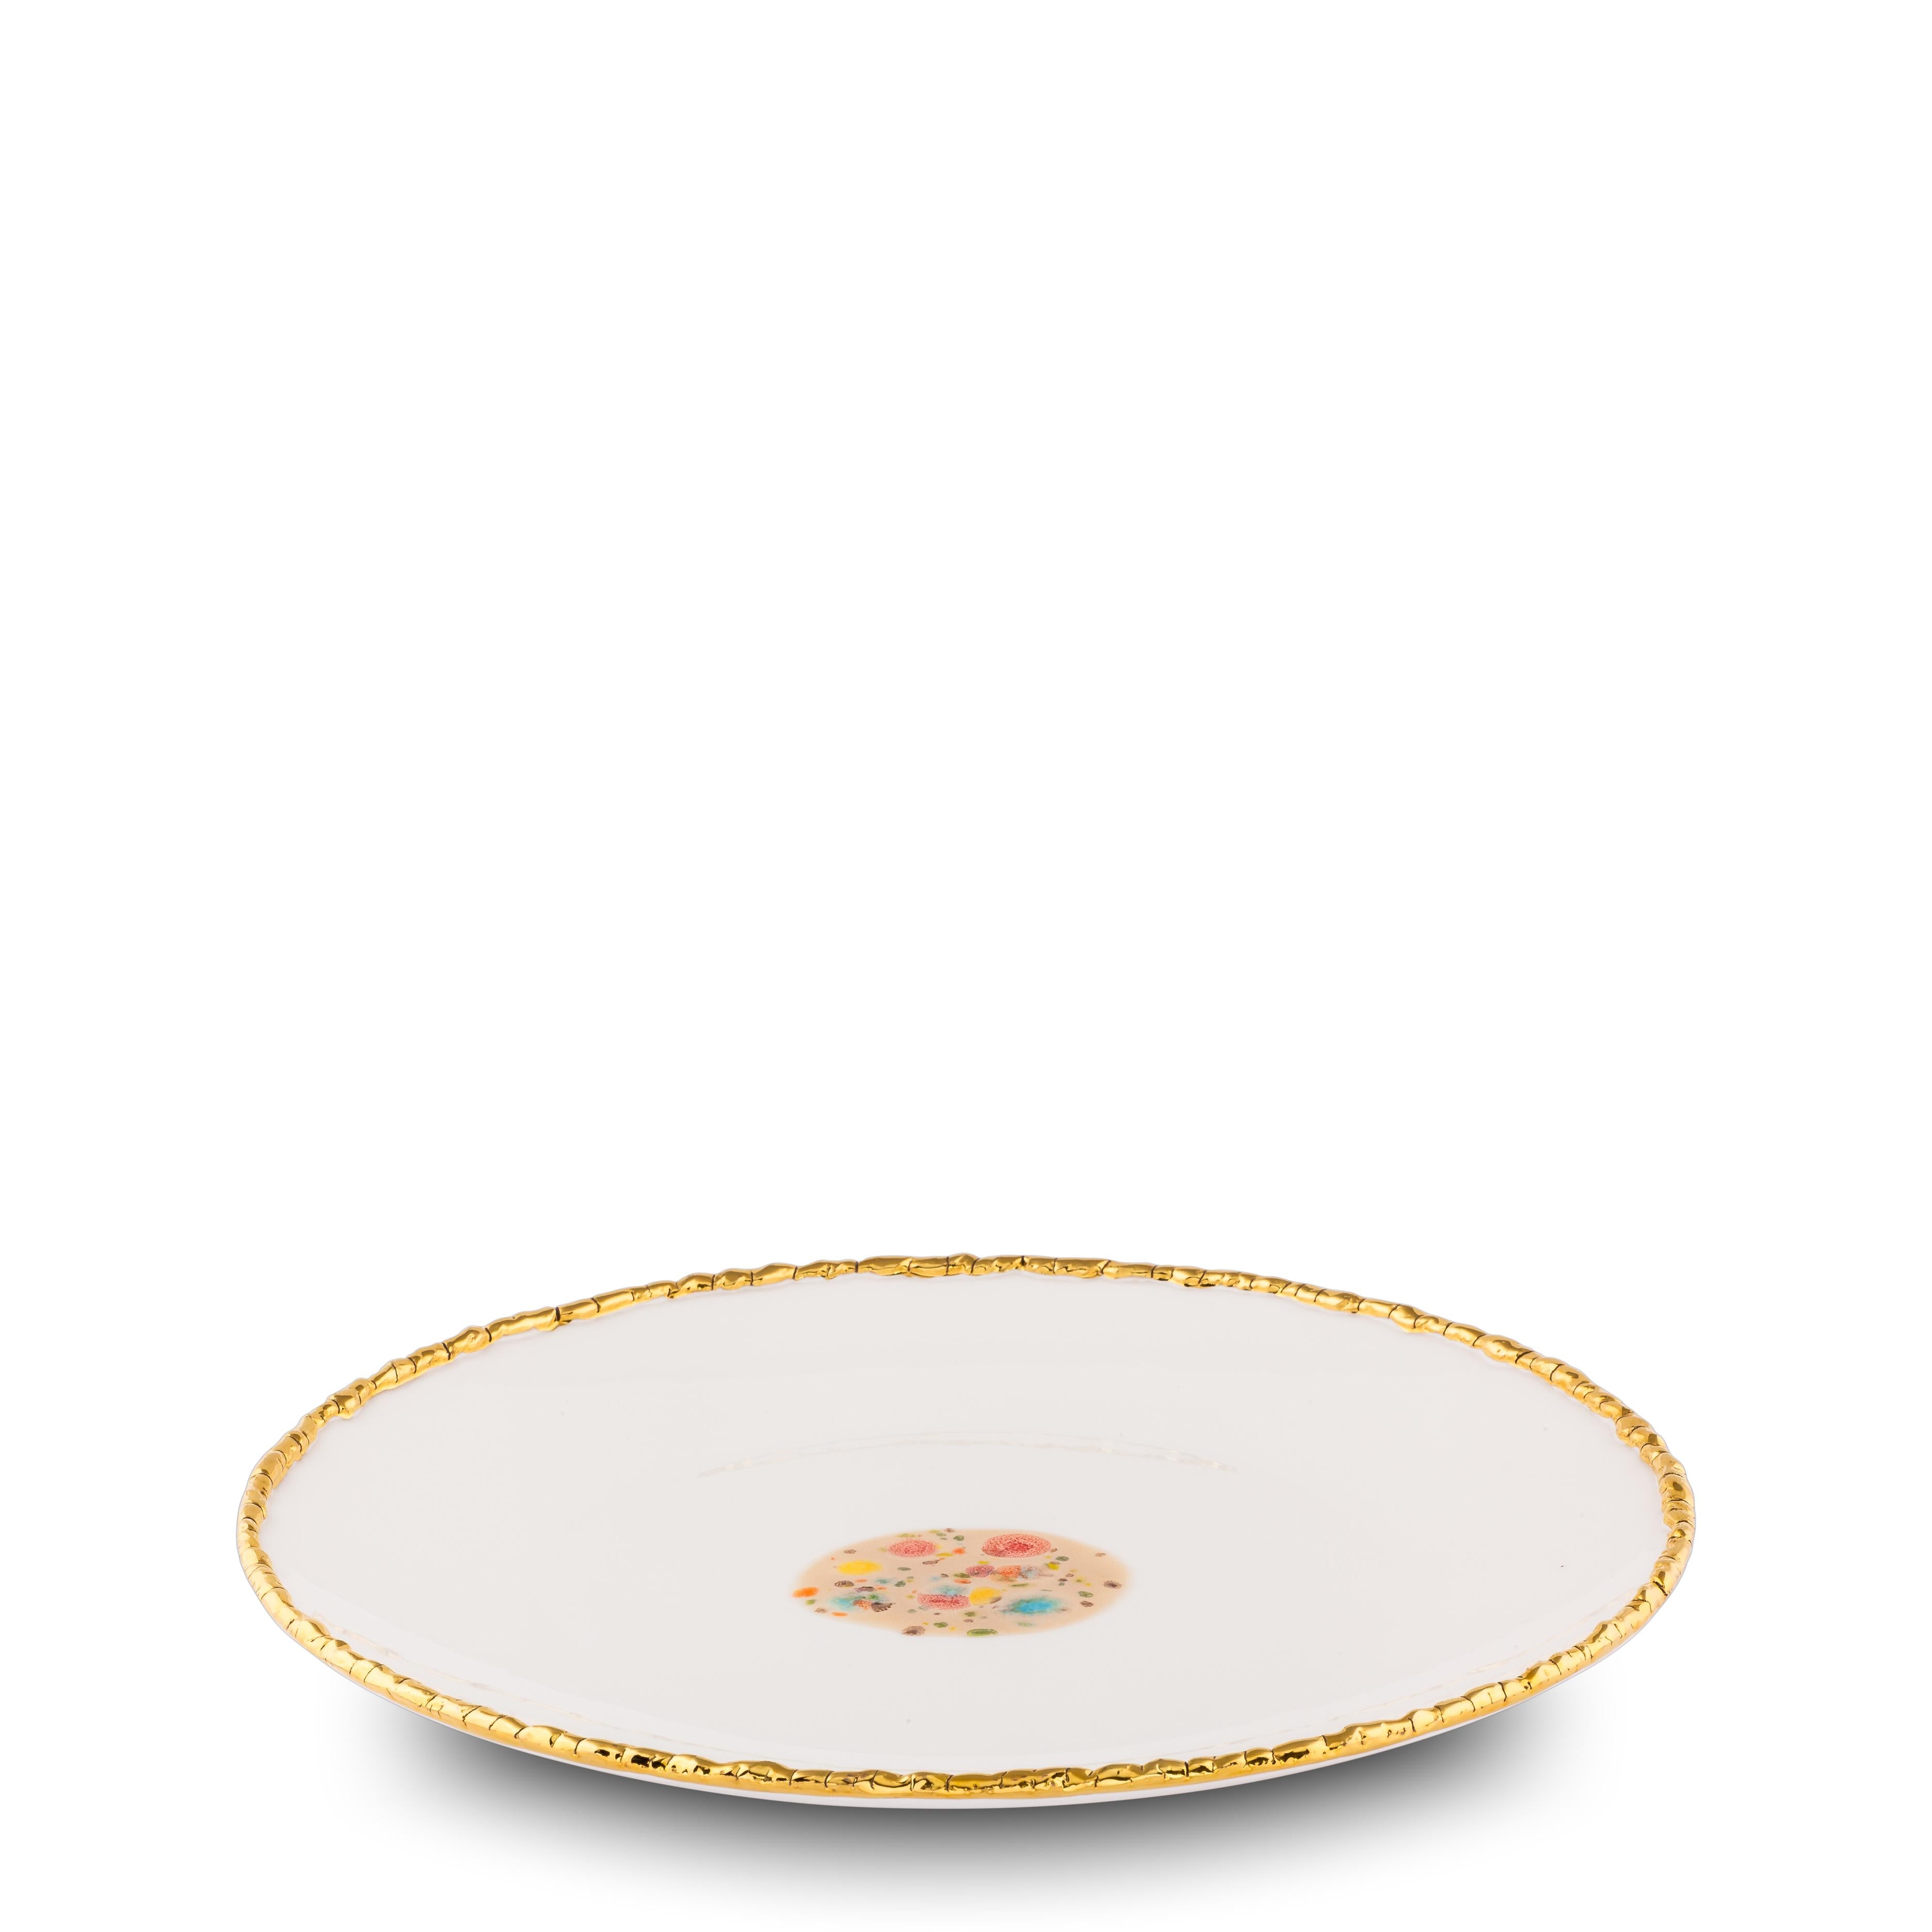 Handcrafted in Italy from the finest porcelain, this white craquelé edge dinner coupe plate from the Chestnut collection has an original golden craquelé rim emphasizing the brilliant white glaze and the Classic, dotted decoration at the